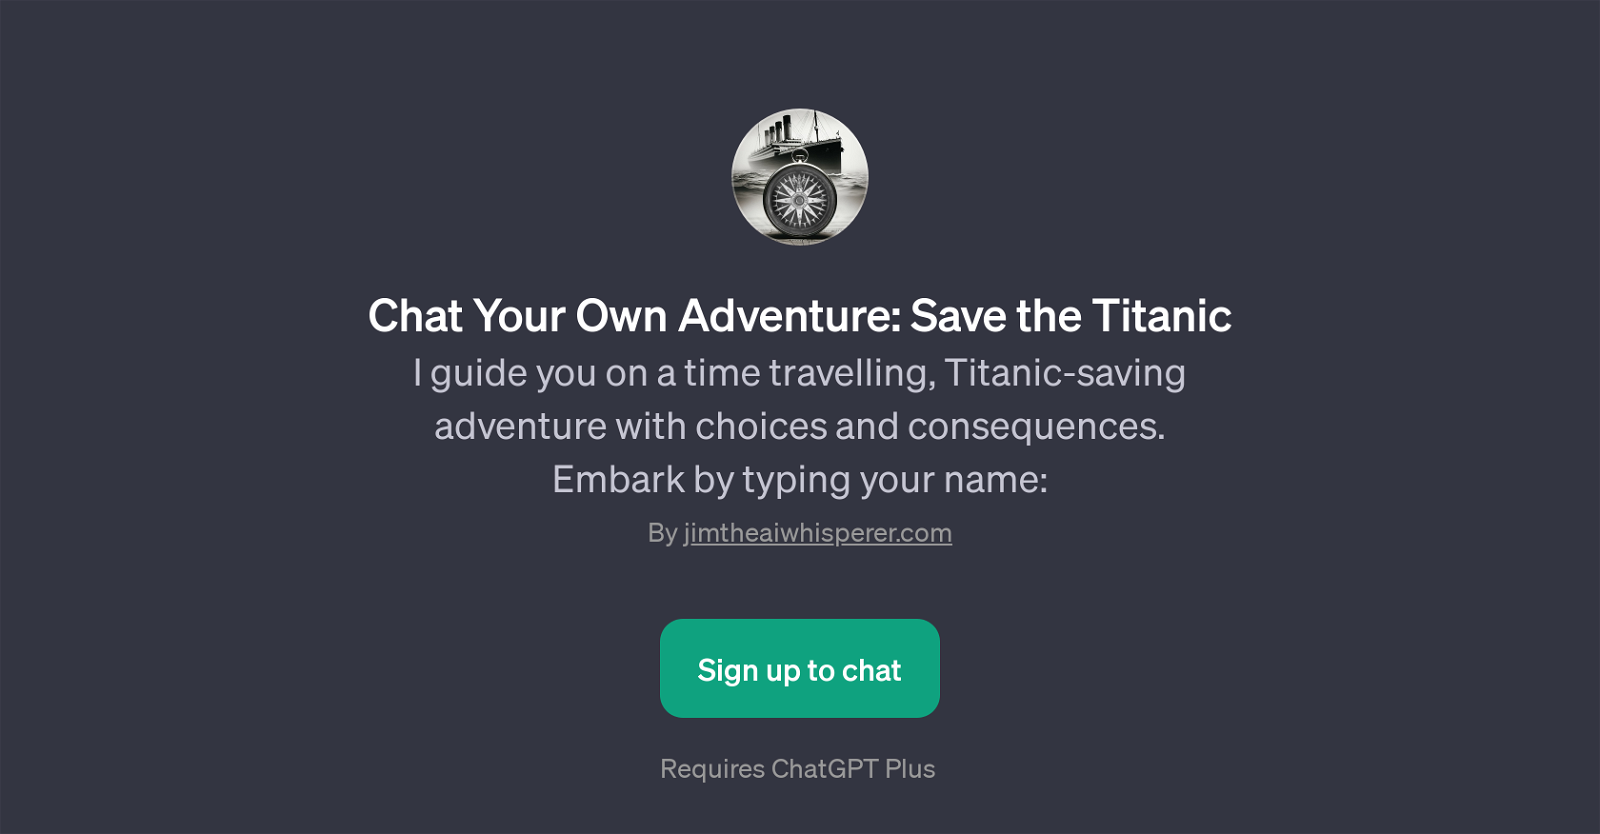 Chat Your Own Adventure: Save the Titanic website